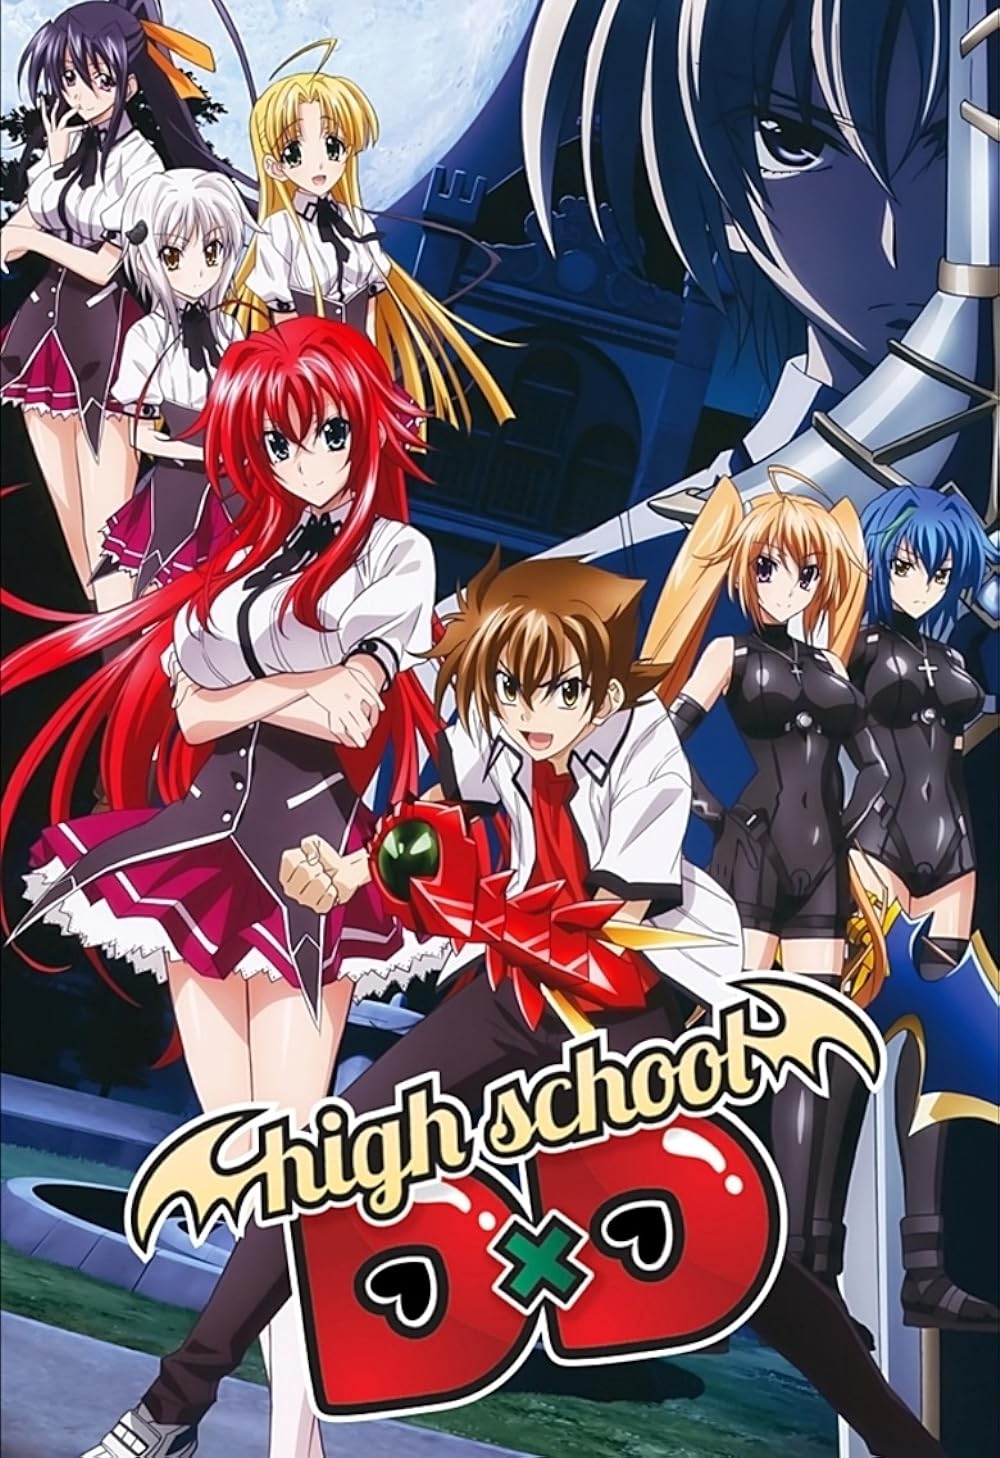 bill walk recommends all episodes of highschool dxd pic